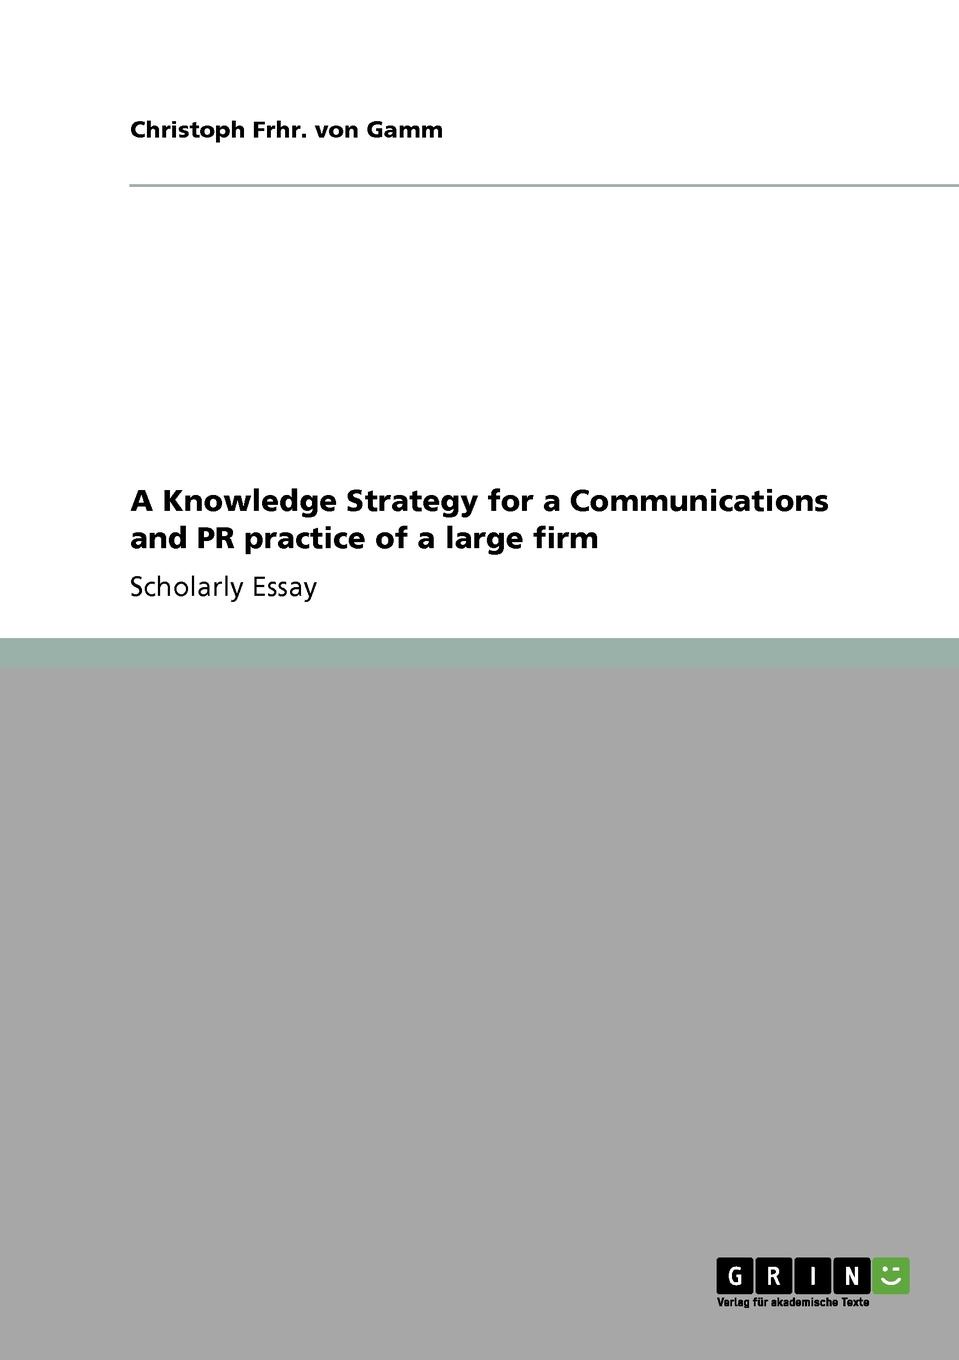 A Knowledge Strategy for a Communications and PR practice of a large firm